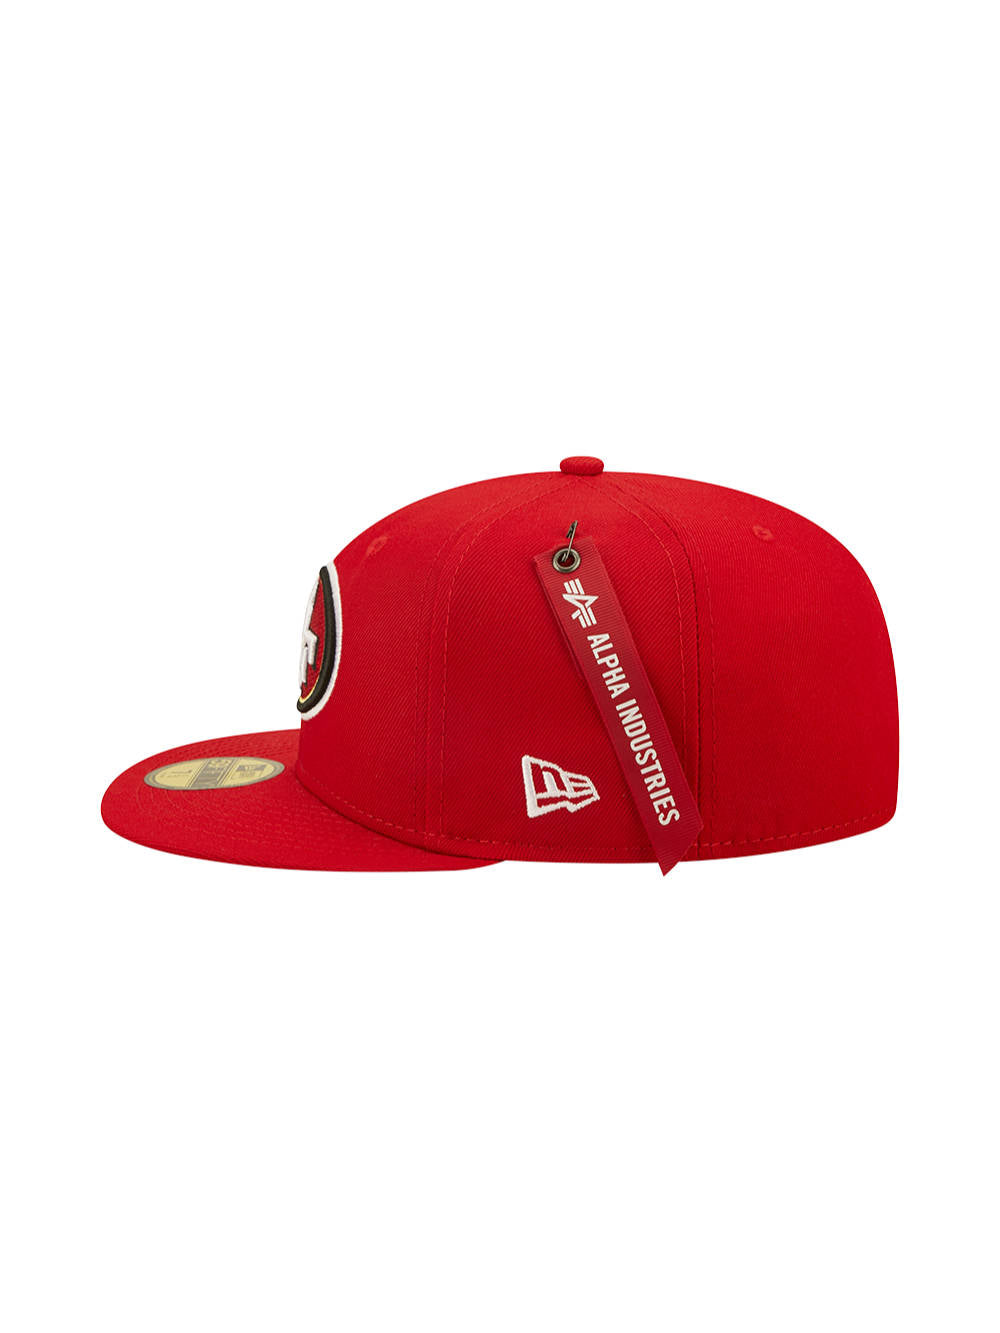 SAN FRANCISCO 49ERS X ALPHA X NEW ERA 59FIFTY FITTED CAP ACCESSORY Alpha Industries 